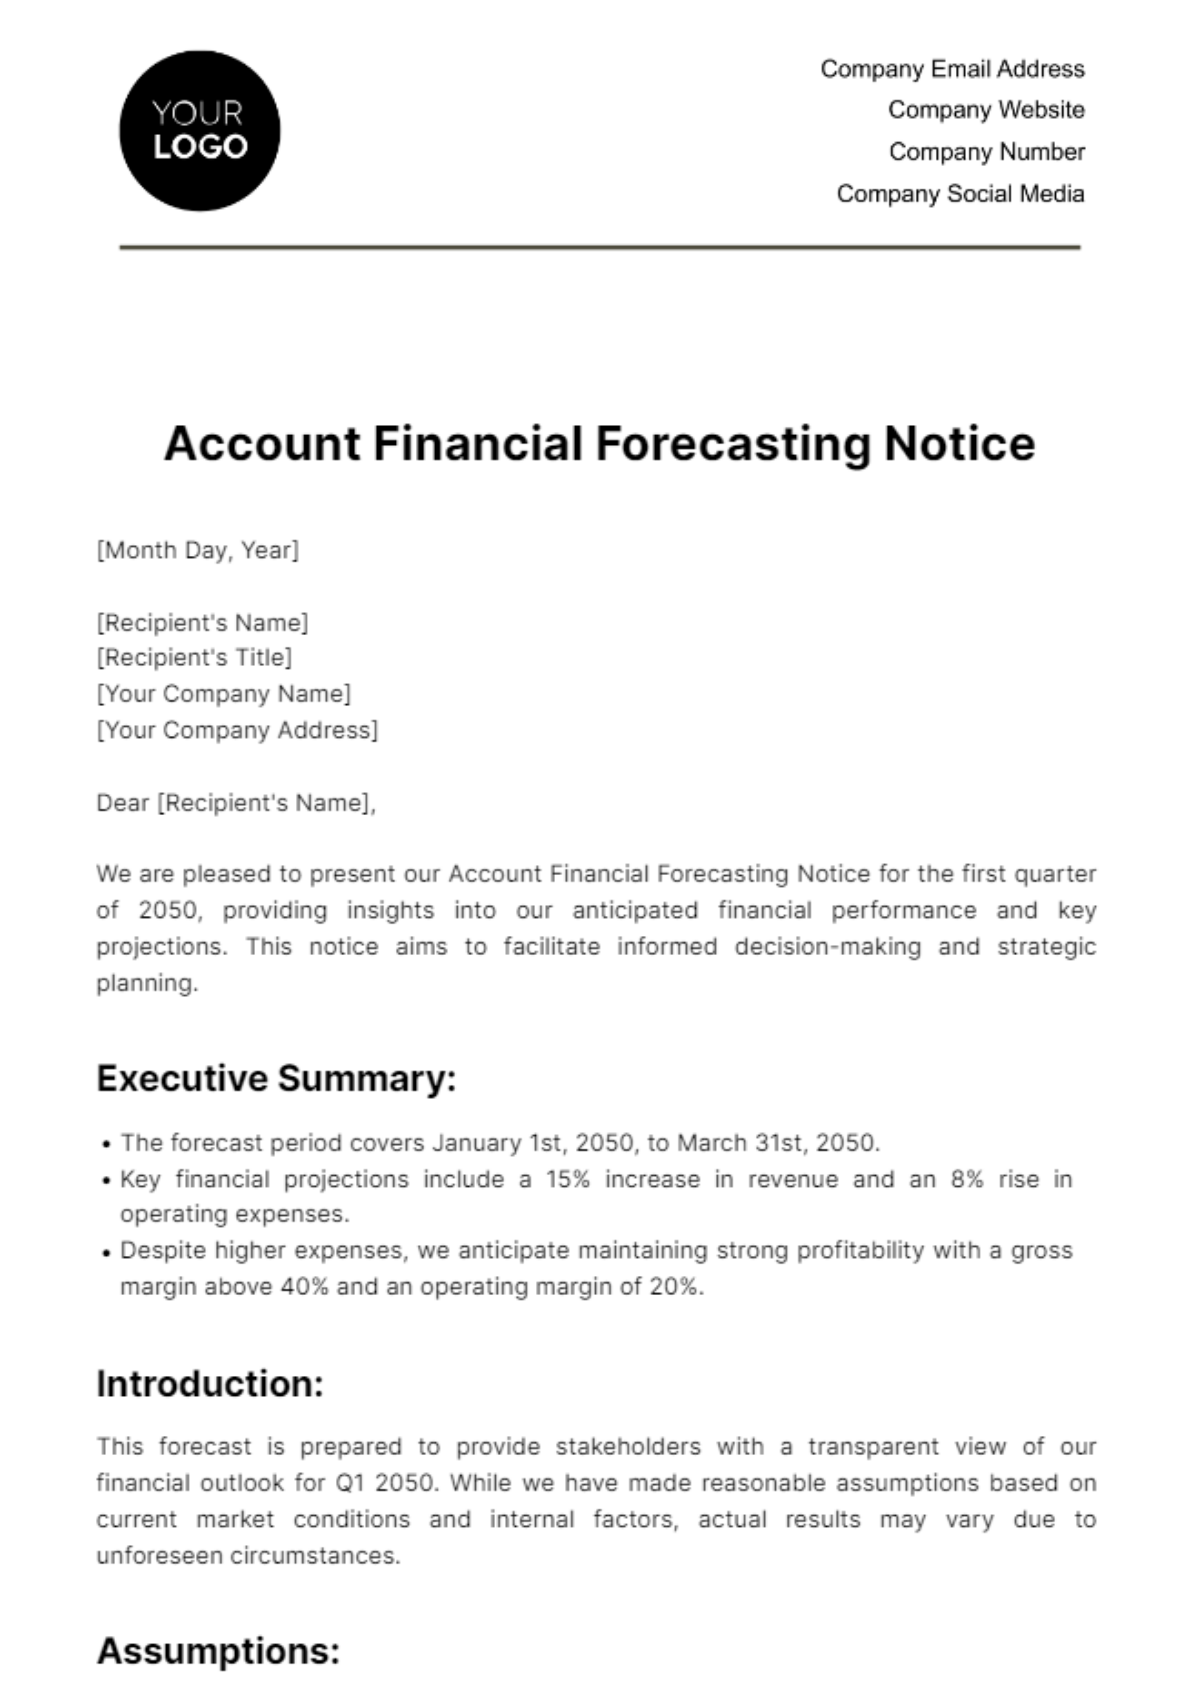 Account Financial Forecasting Notice Template